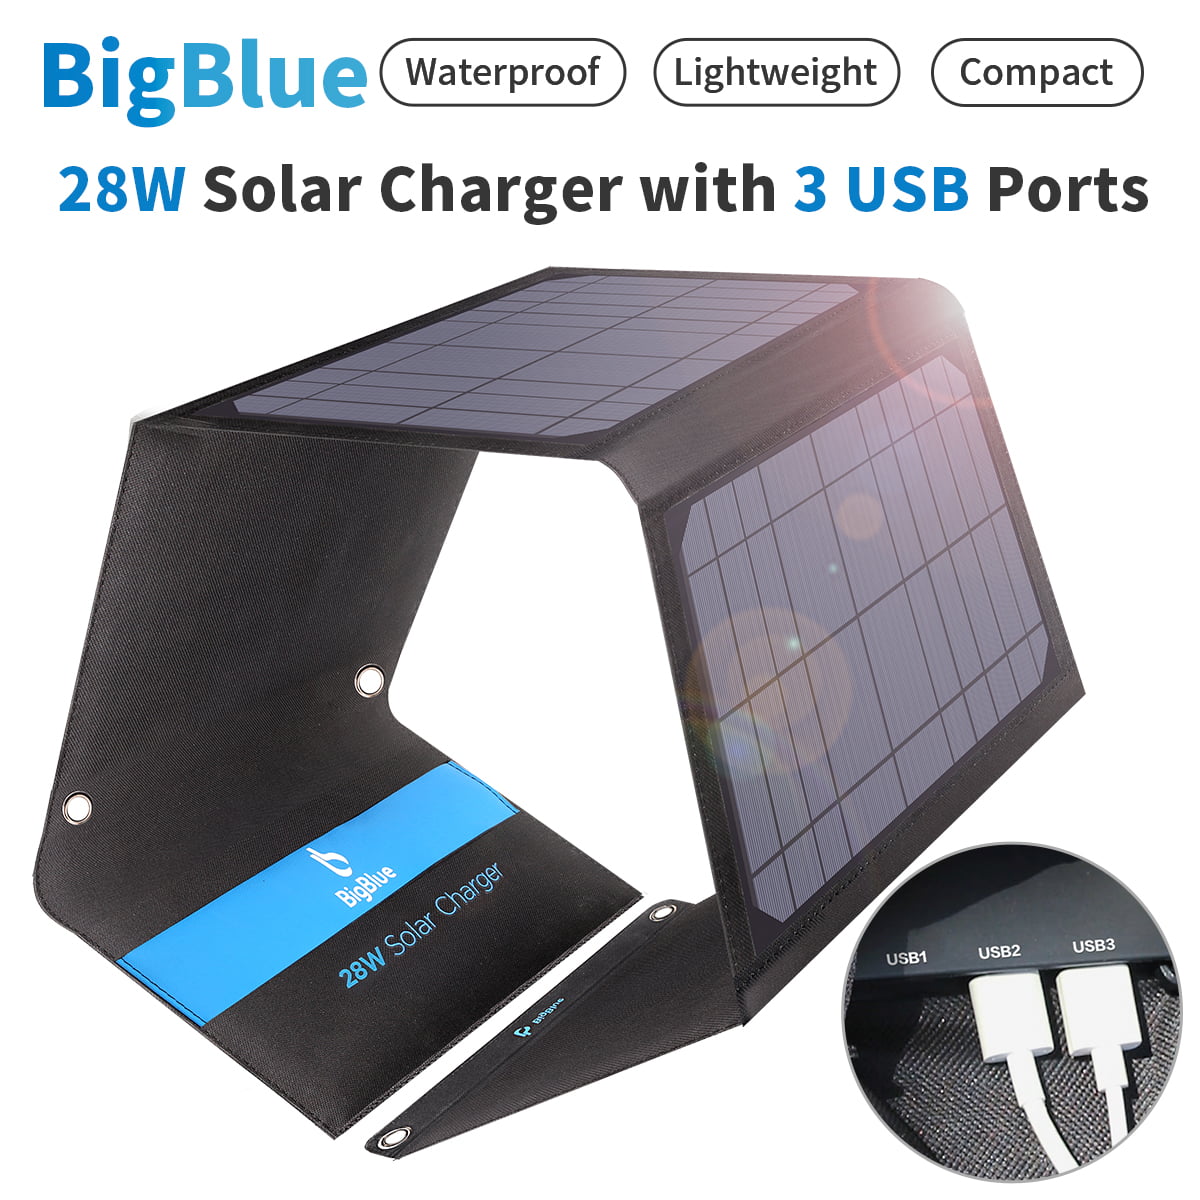 iPad Solar Charger 6V 28W Portable Solar Charger for Cell Phone Dual USB Ports Waterproof Power Bank Foldable Battery Chargers for iPhone Xs XS Max XR X 8 7 Plus Galaxy S9 S8 Note 8 and More Black